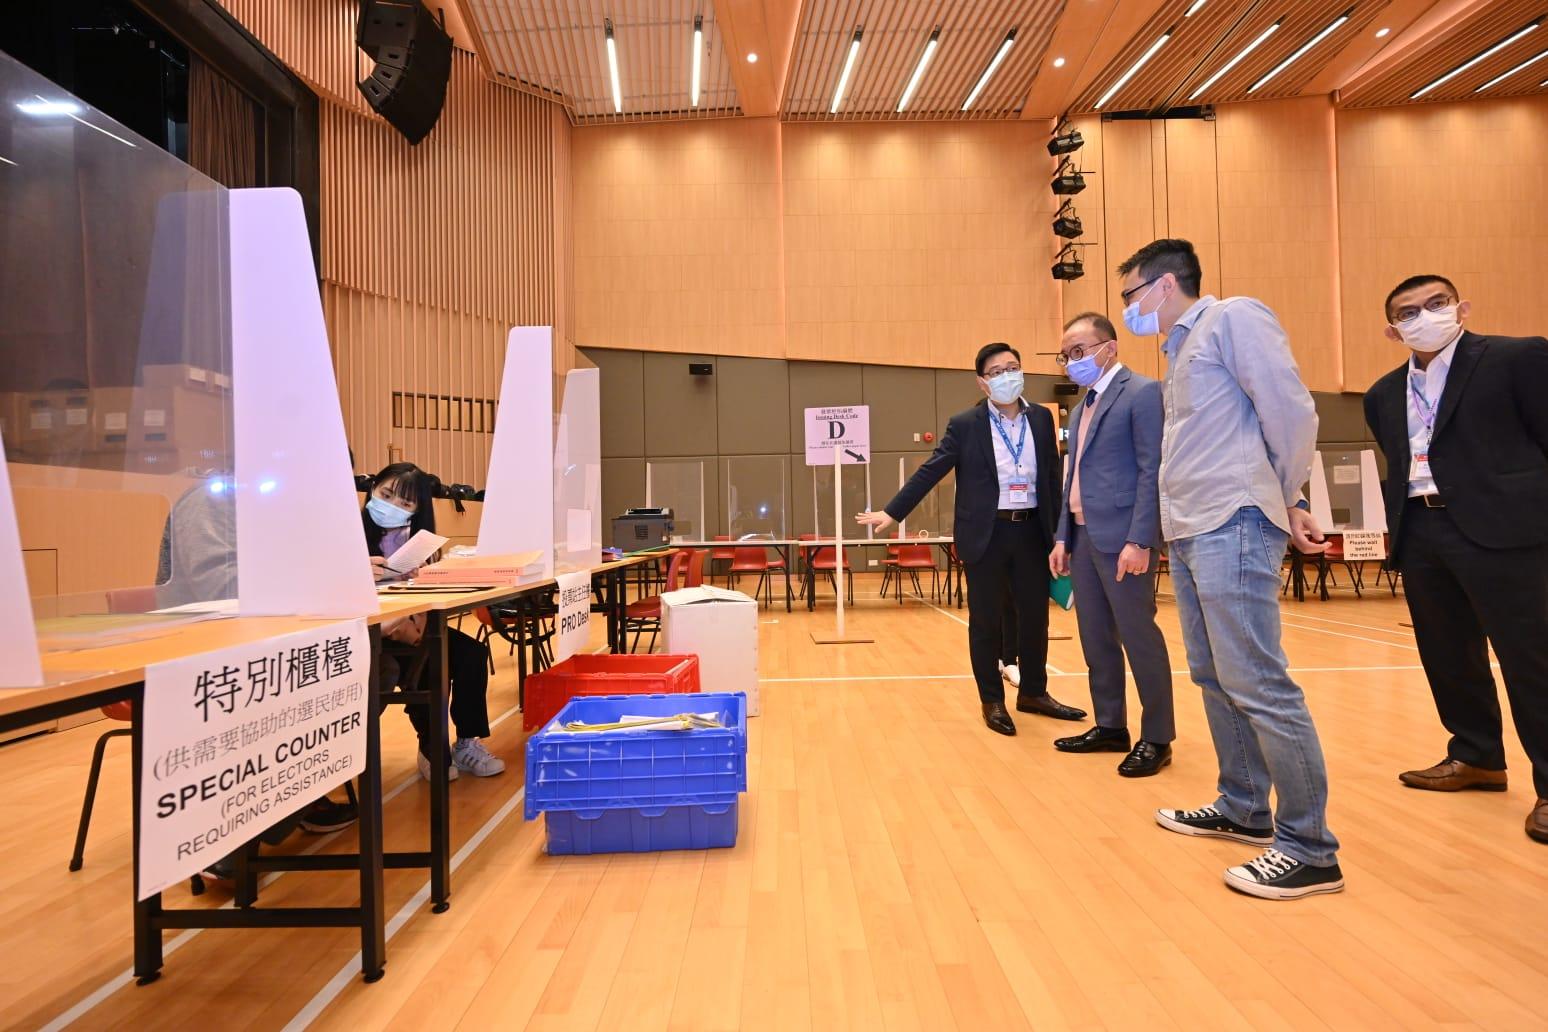 The Secretary for Constitutional and Mainland Affairs, Mr Erick Tsang Kwok-wai, today (December 18) visited various polling stations to inspect the preparatory work and rehearsal sessions for the Legislative Council General Election. Photo shows Mr Tsang (third right) being briefed on the operation of special counter by electoral staff at the polling station located at North Point Community Hall.